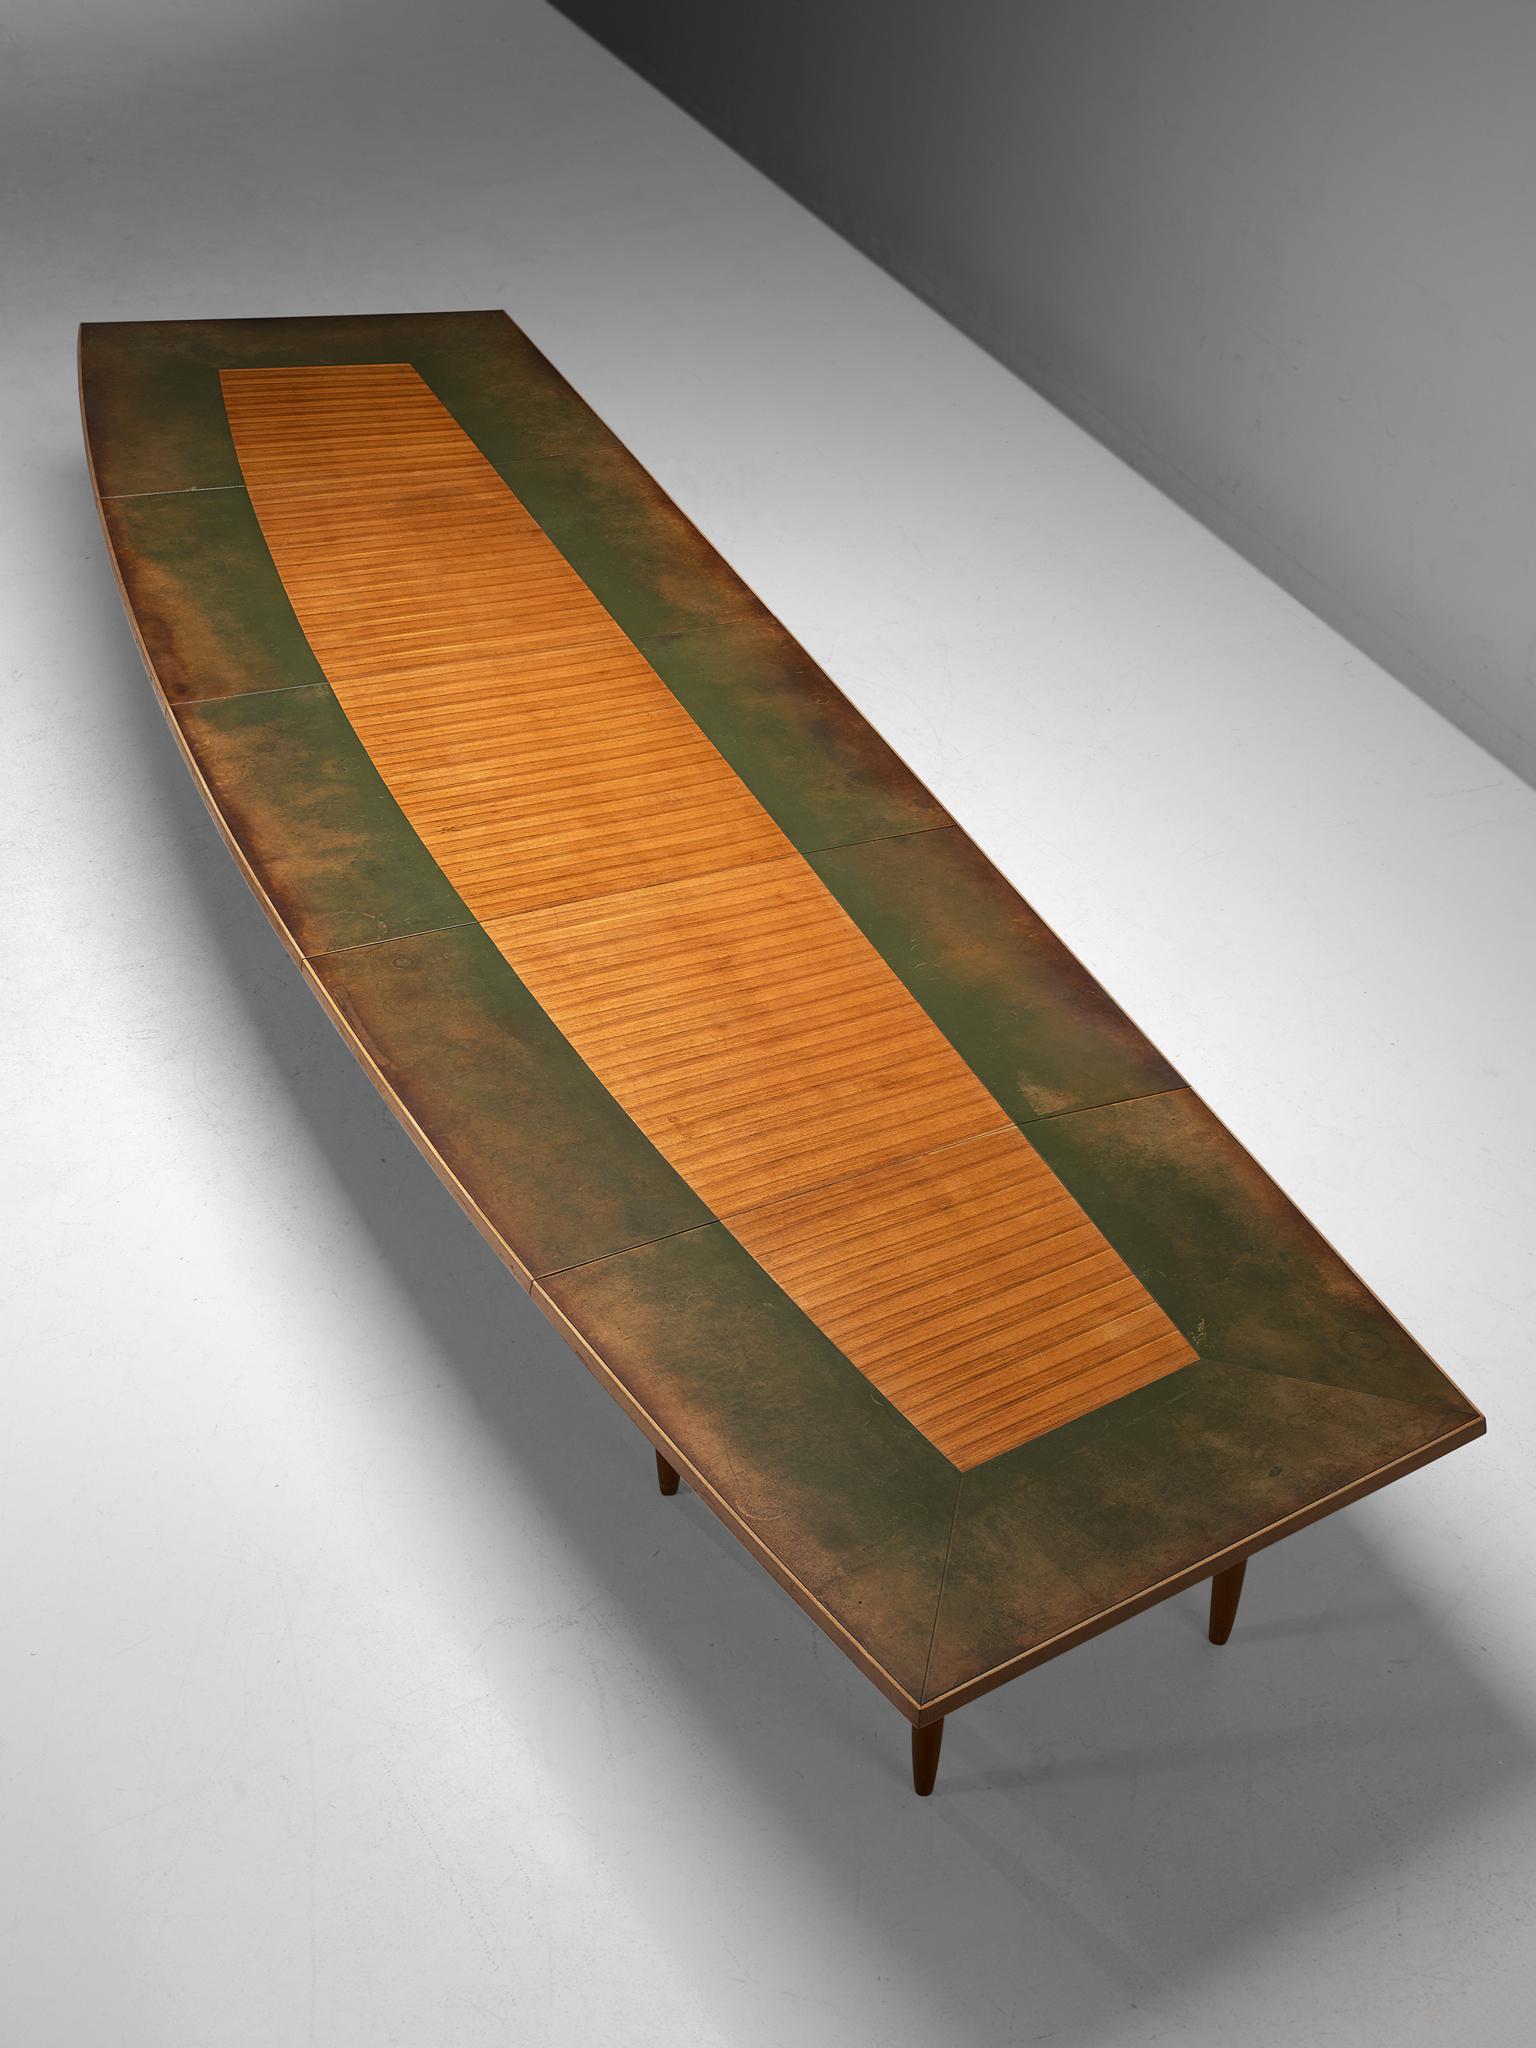 Conference table, walnut, wood and leather, Scandinavia, 1950s.

This nearly 7 metre/23 ft. long conference table is an exquisite piece from the Scandinavian Modern period. Probably custom made, the table features an unusual, yet interesting shaped